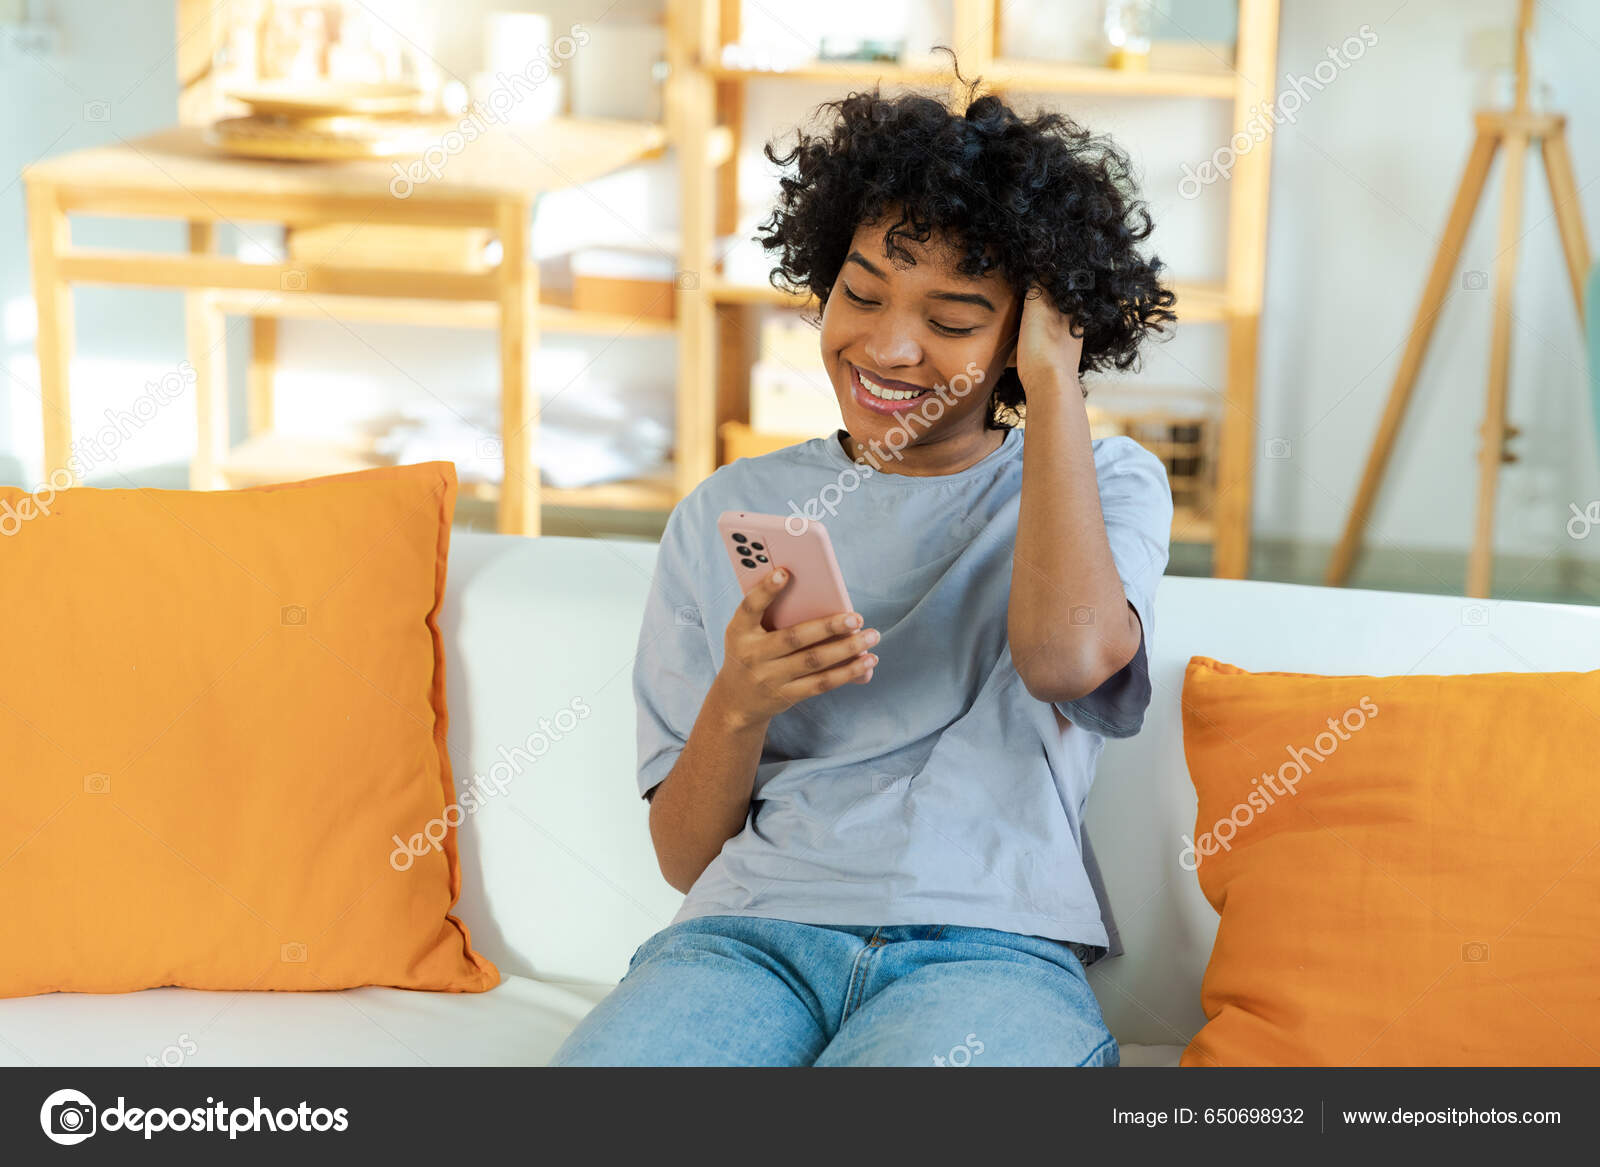 Cheerful Young African Woman Holding A Pillow And Sitting On The